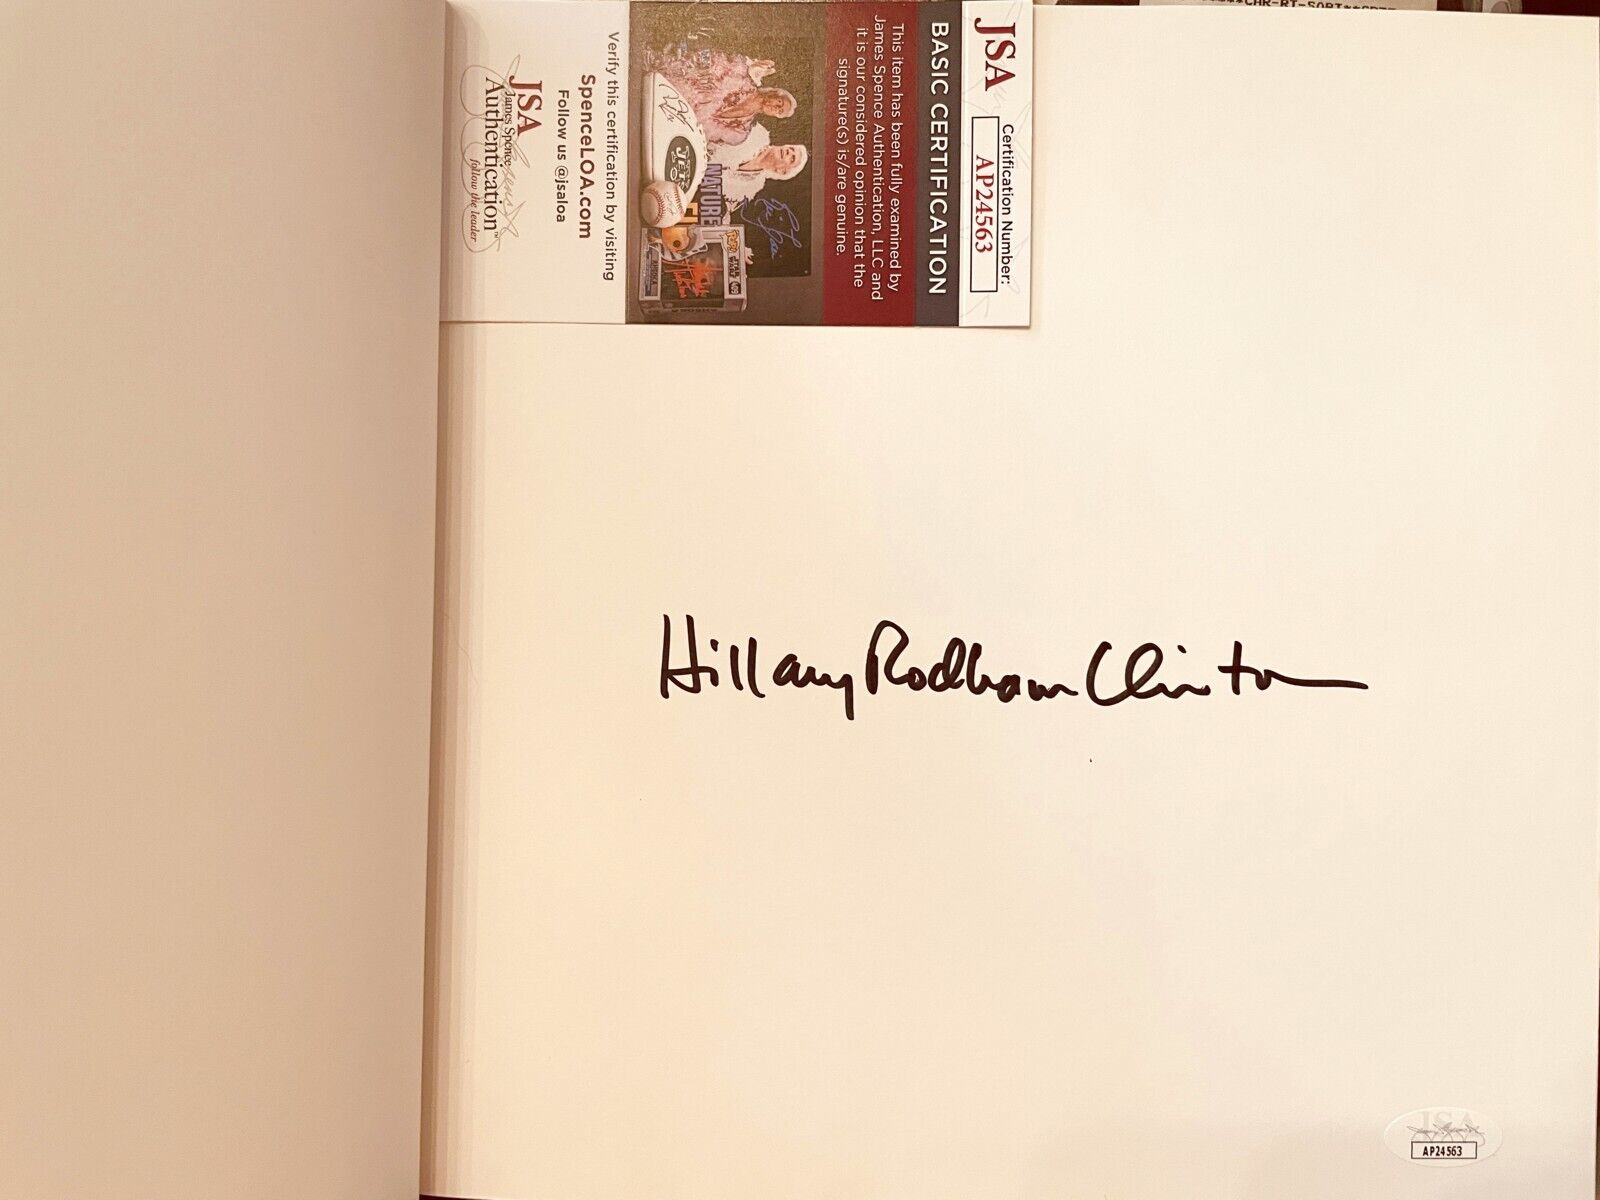 Hillary Clinton FULL NAME signed An Invitation to White House hardcover book JSA